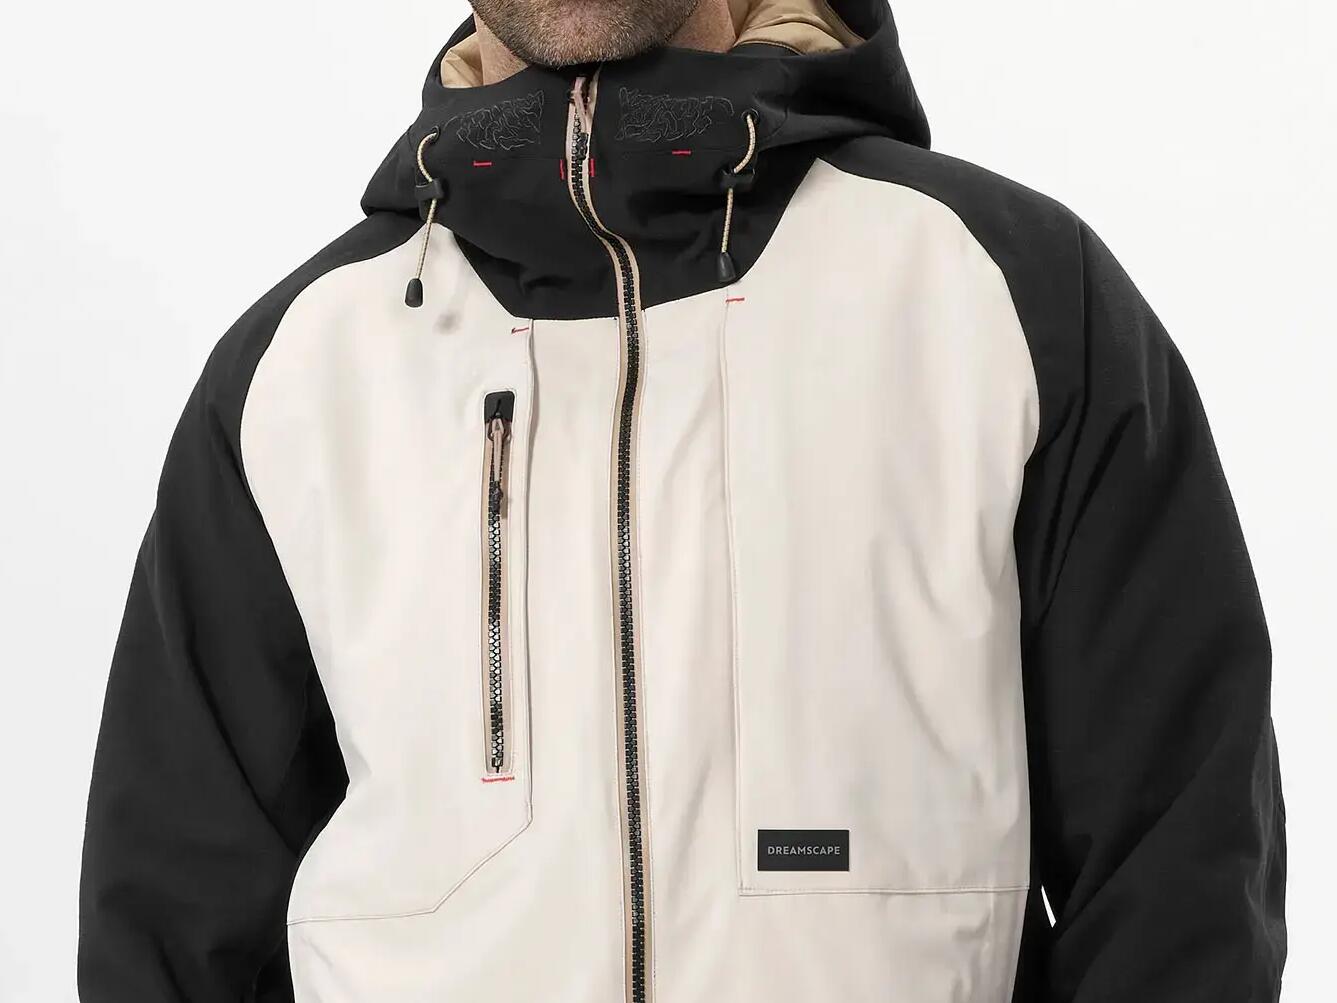 Check out our ski jackets/down jackets